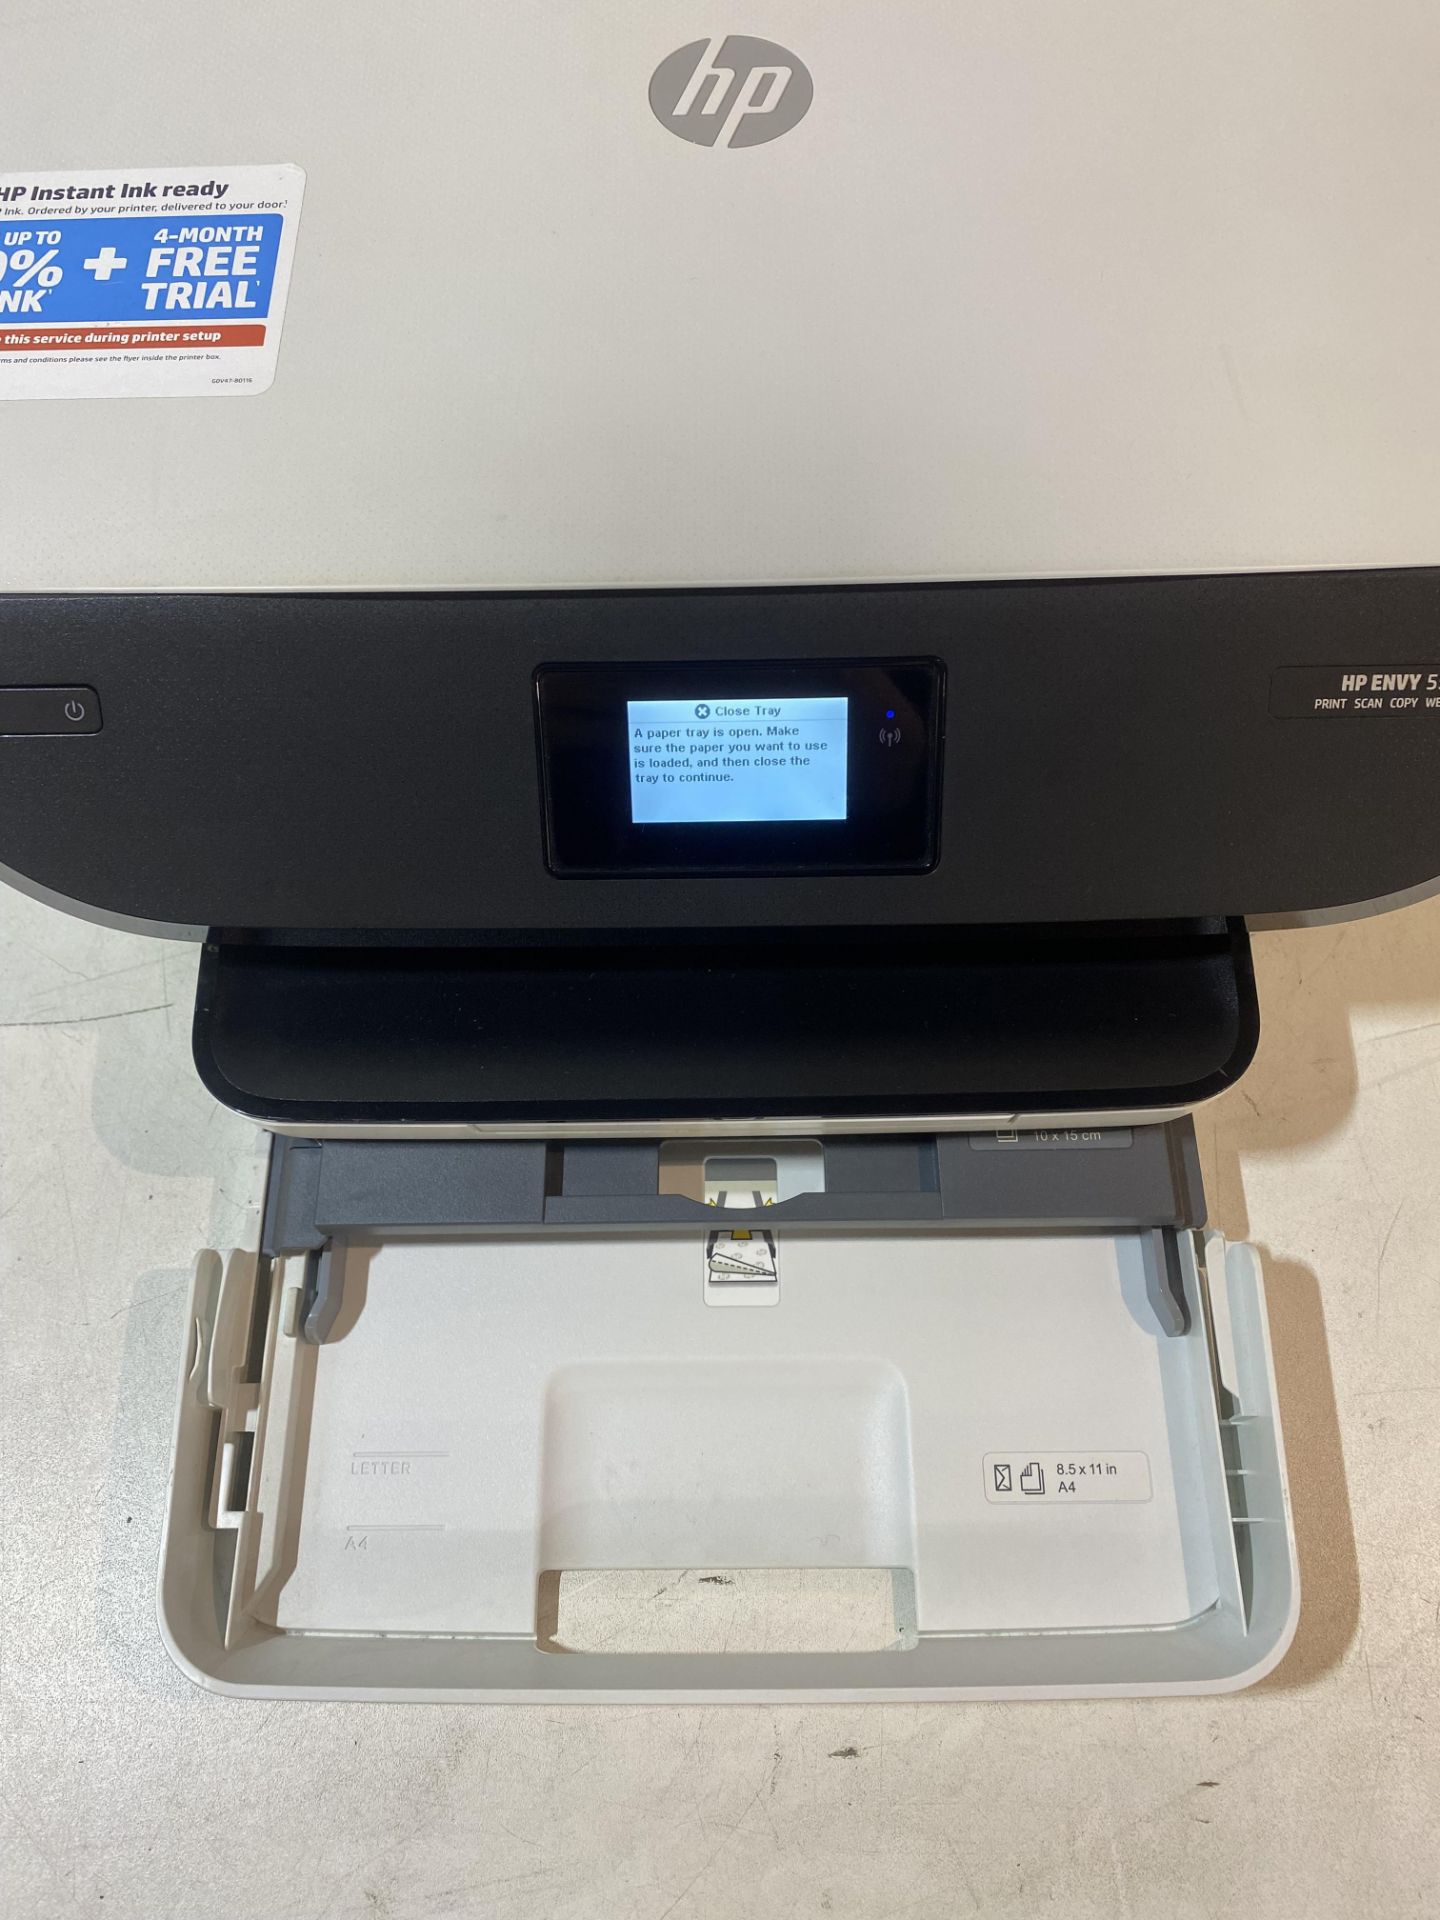 HP Envy 5541 All-in-One Printer - Image 10 of 12